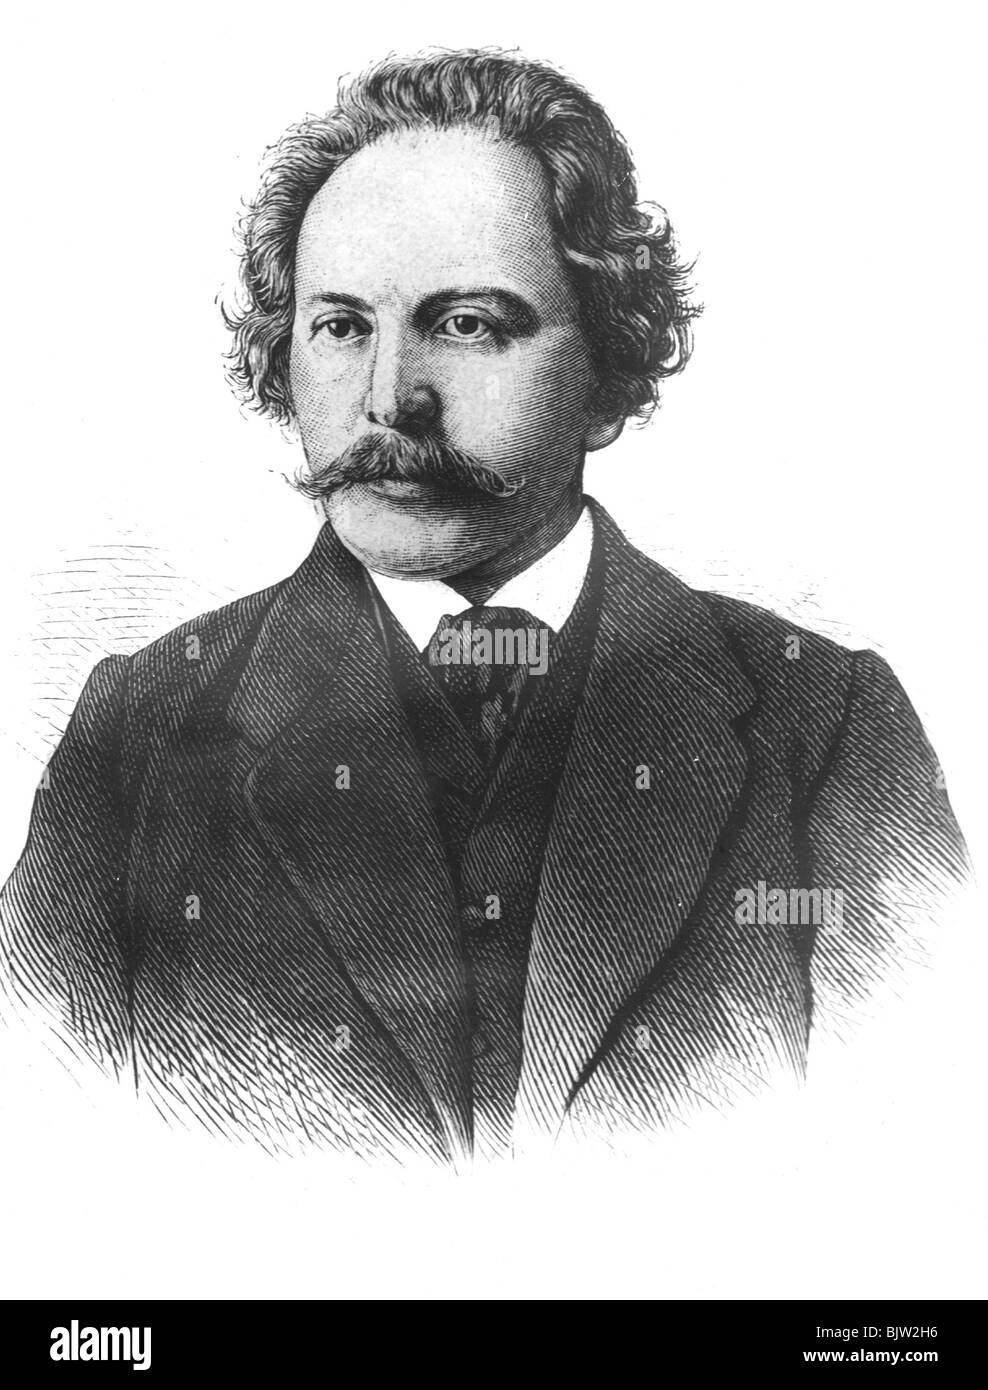 Goldmark, Karl, 18.5.1830 - 2.1.1915, Austrian composer, portrait, wood engraving after drawing by E. Kolb, 1882, Stock Photo